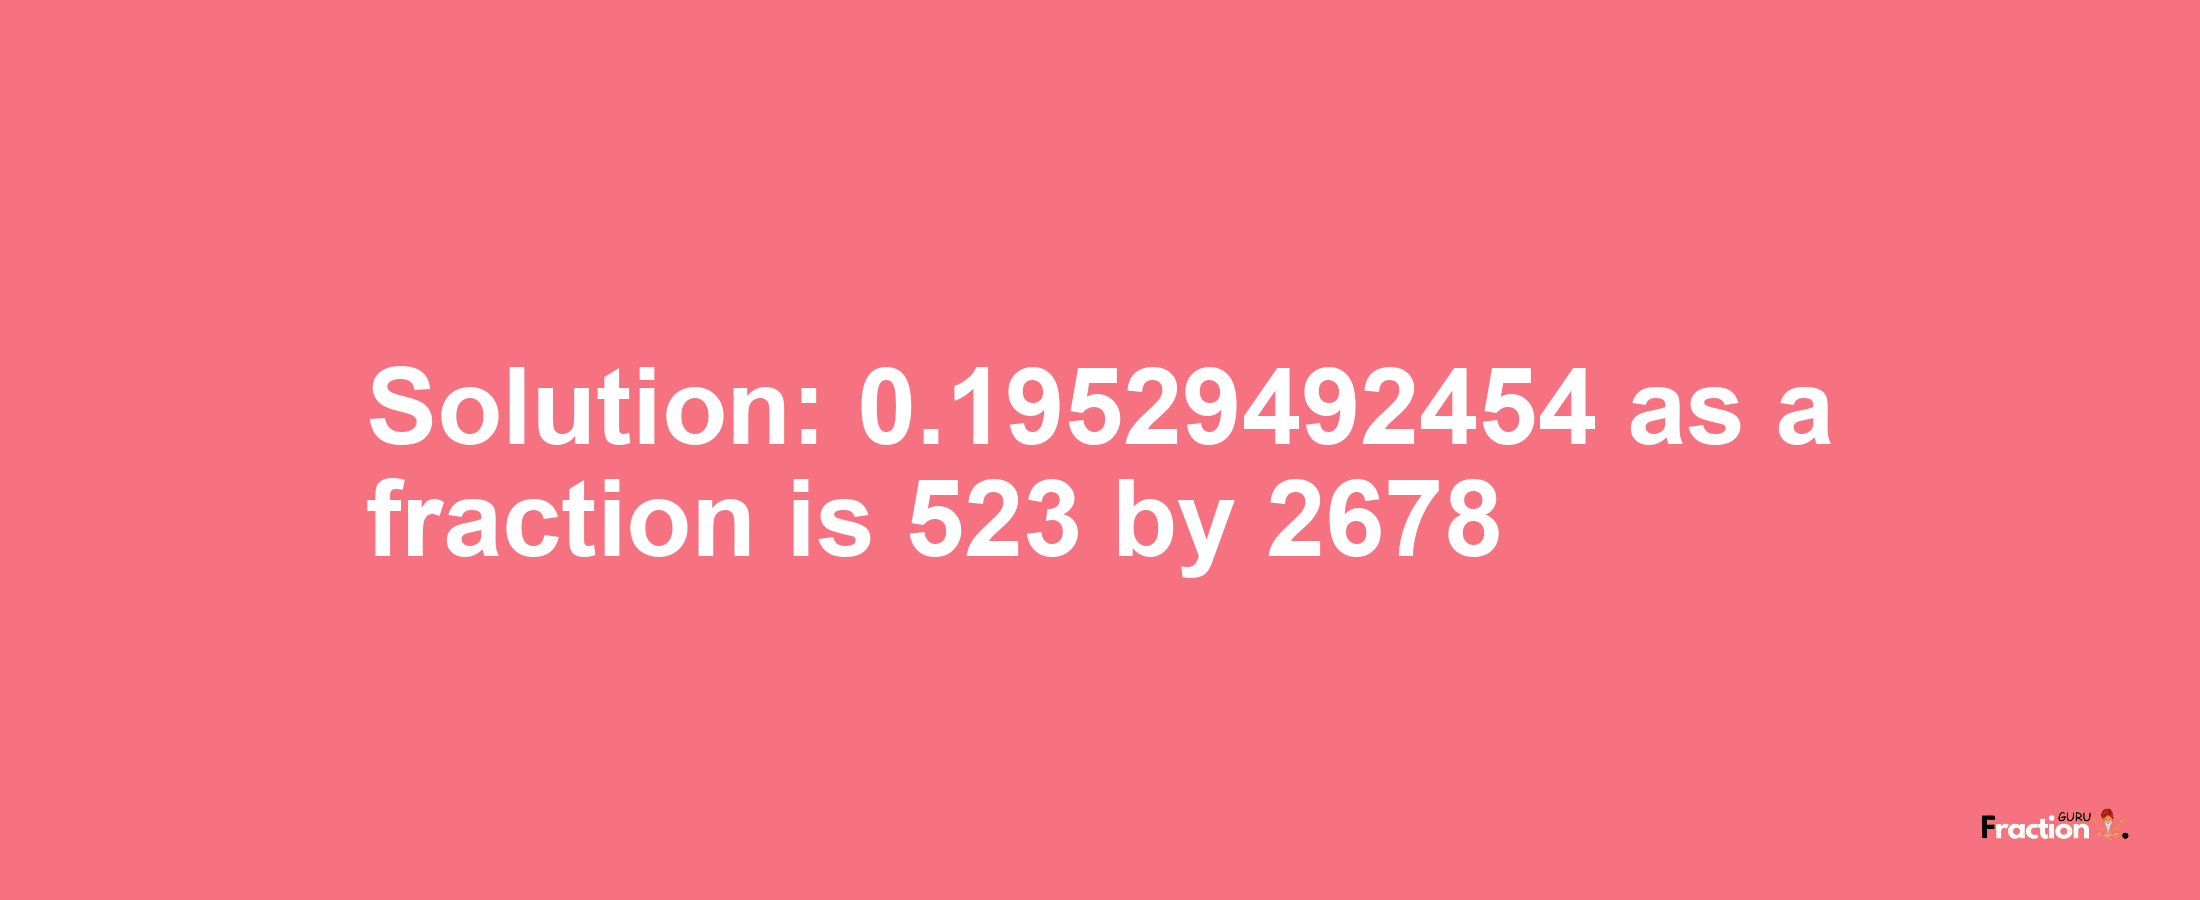 Solution:0.19529492454 as a fraction is 523/2678